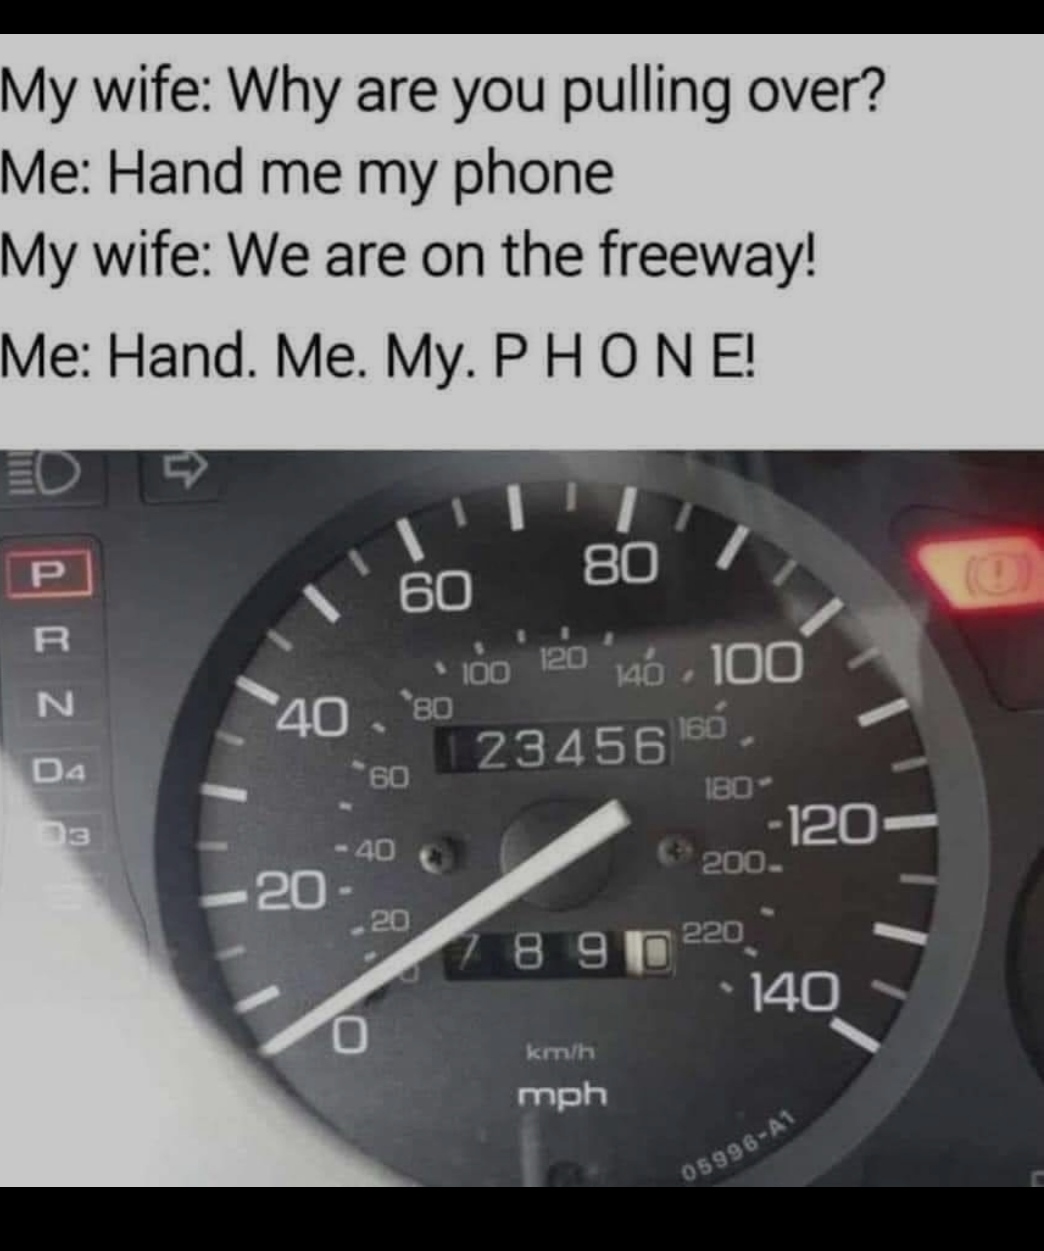 cool pics and random photos - speedometer - My wife Why are you pulling over? Me Hand me my phone My wife We are on the freeway! Me Hand. Me. My. Phone! P 80 60 120 100 N 140 . 100 40, '80 123456156 Da 60 180 120 200. 40 20 20 220 7 8 9 0 140 kmh mph 0599